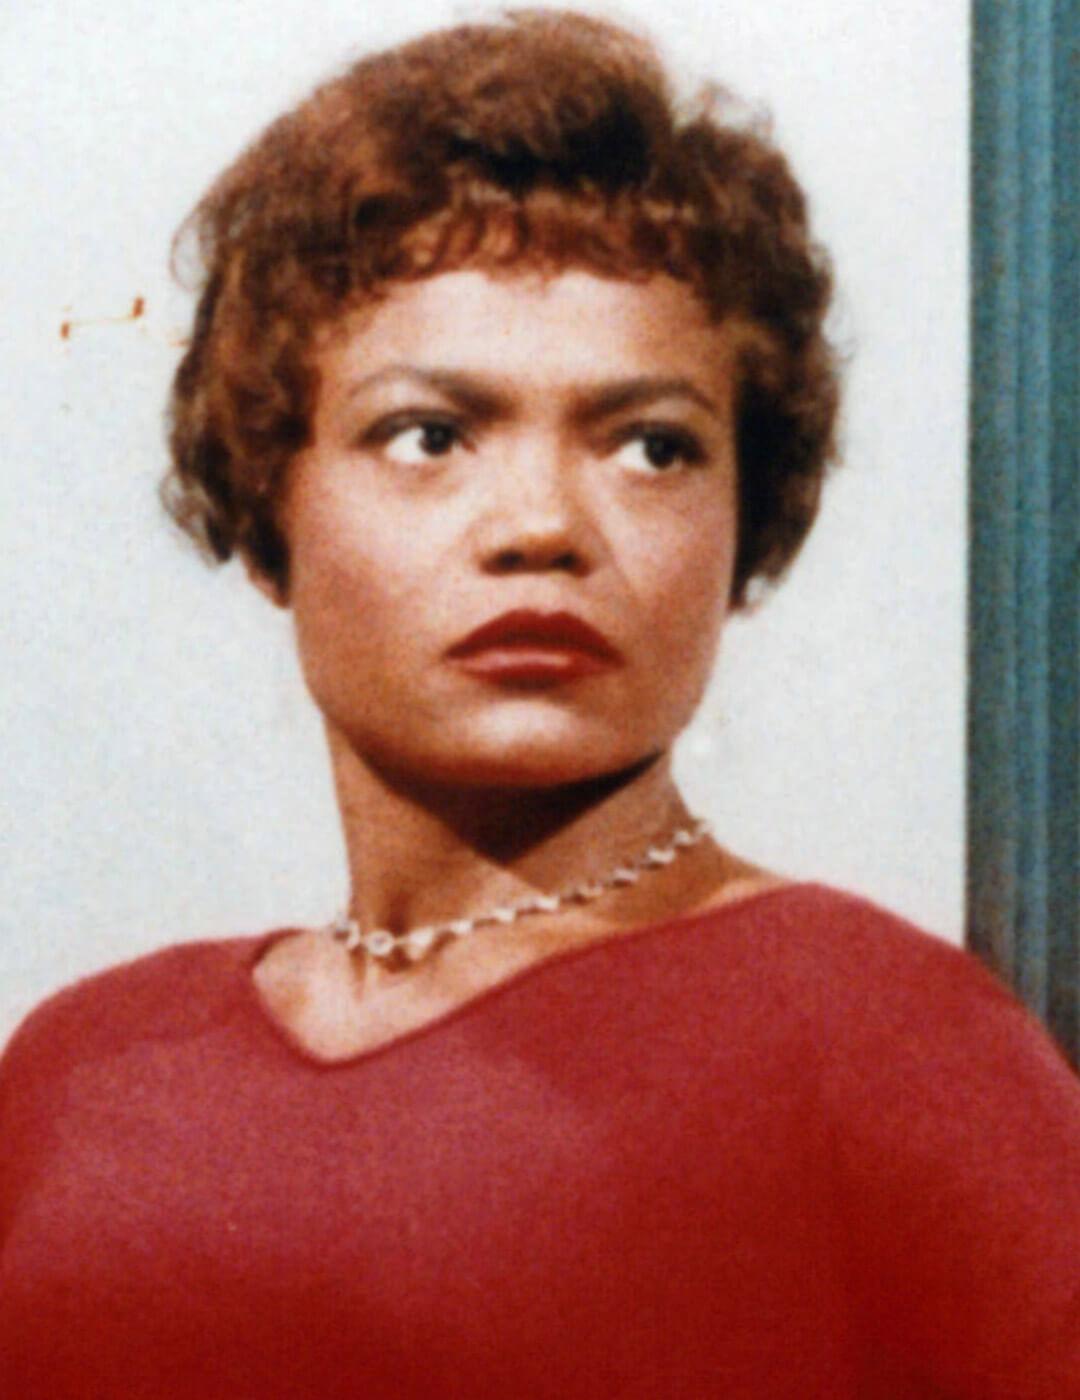 Old portrait of Eartha Kitt in a red dress and gold neclace